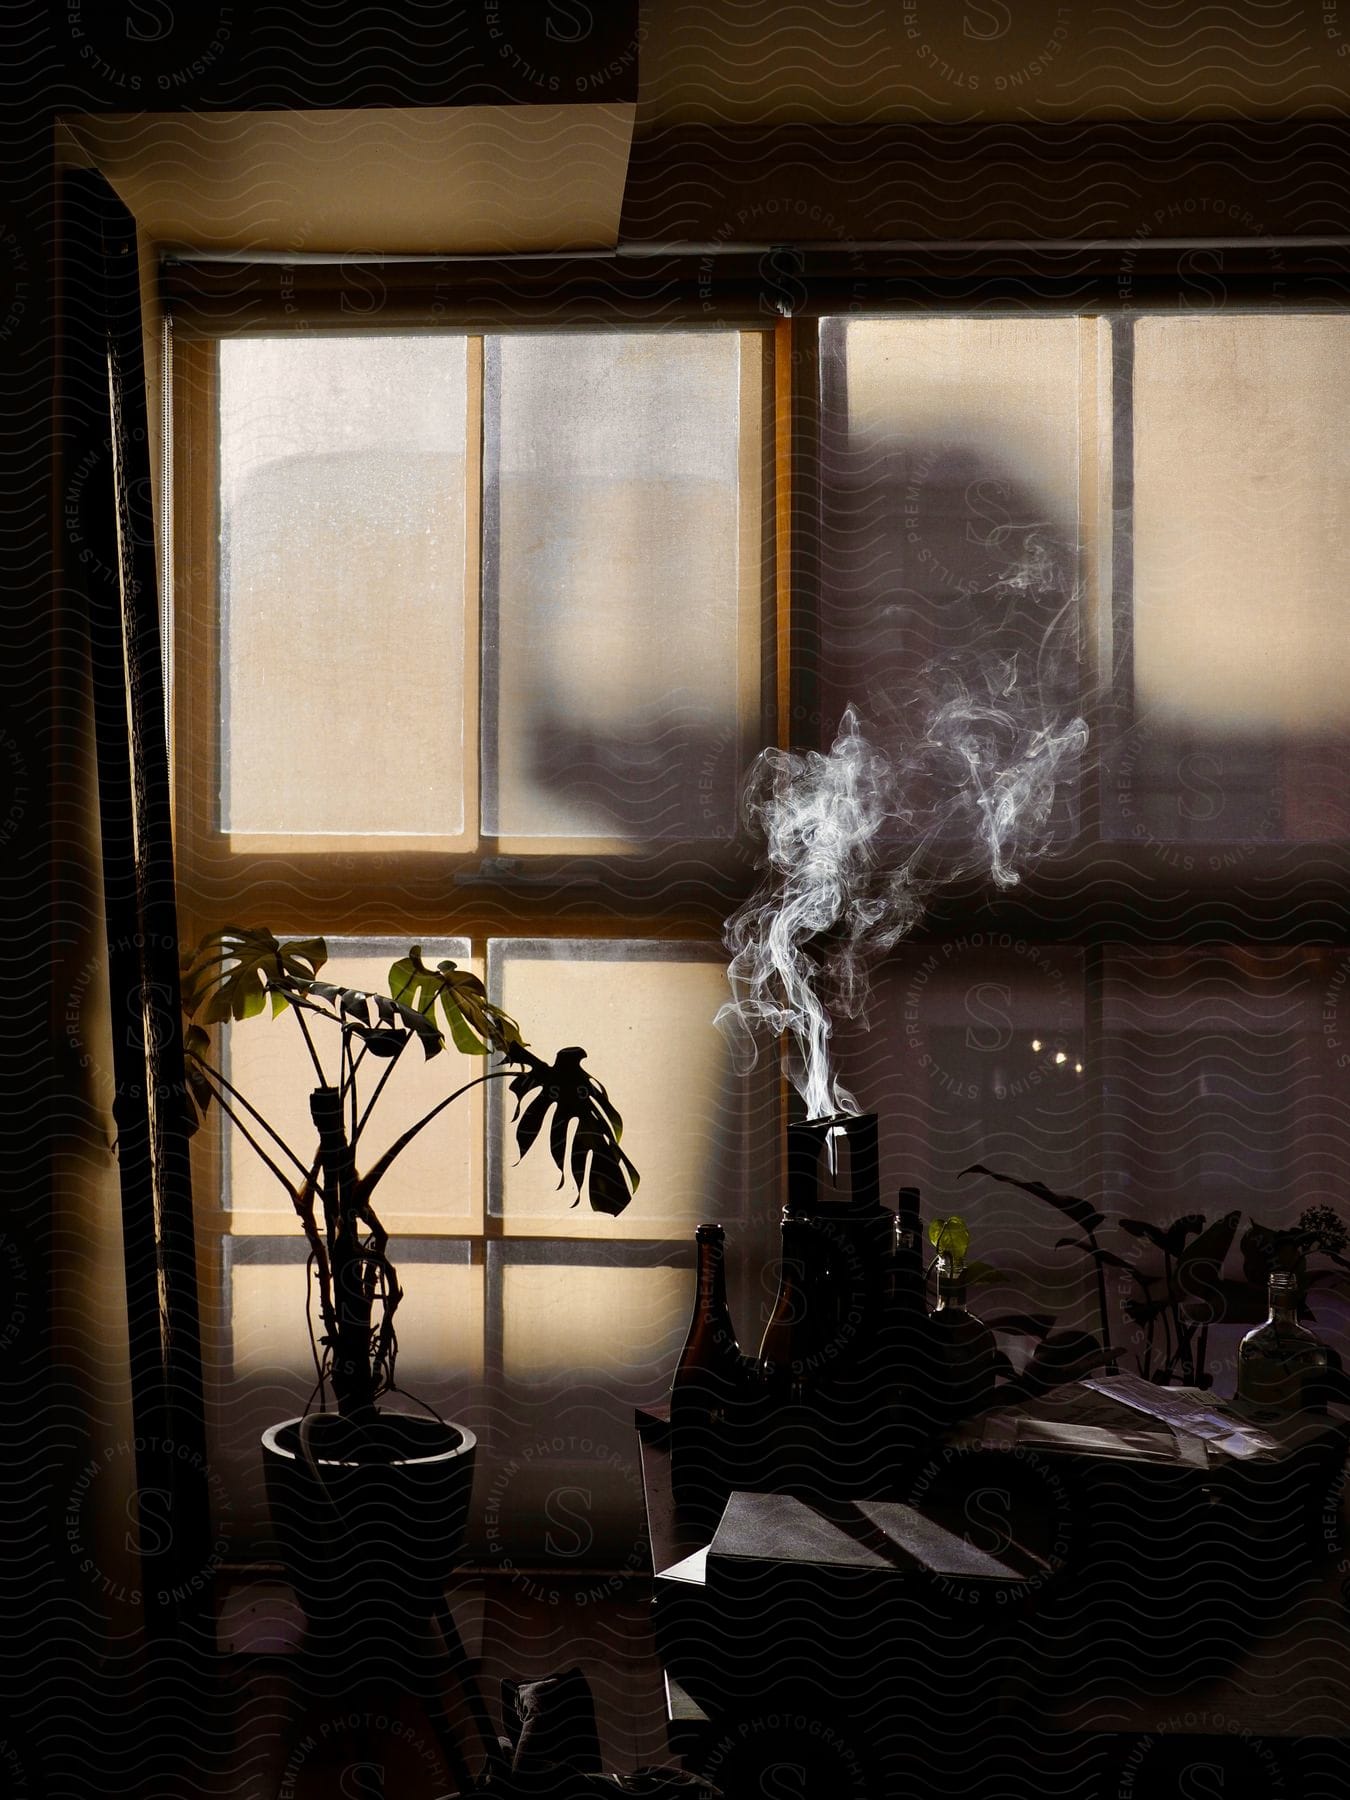 Incense smoke rising from one of several bottles on a table near a large window